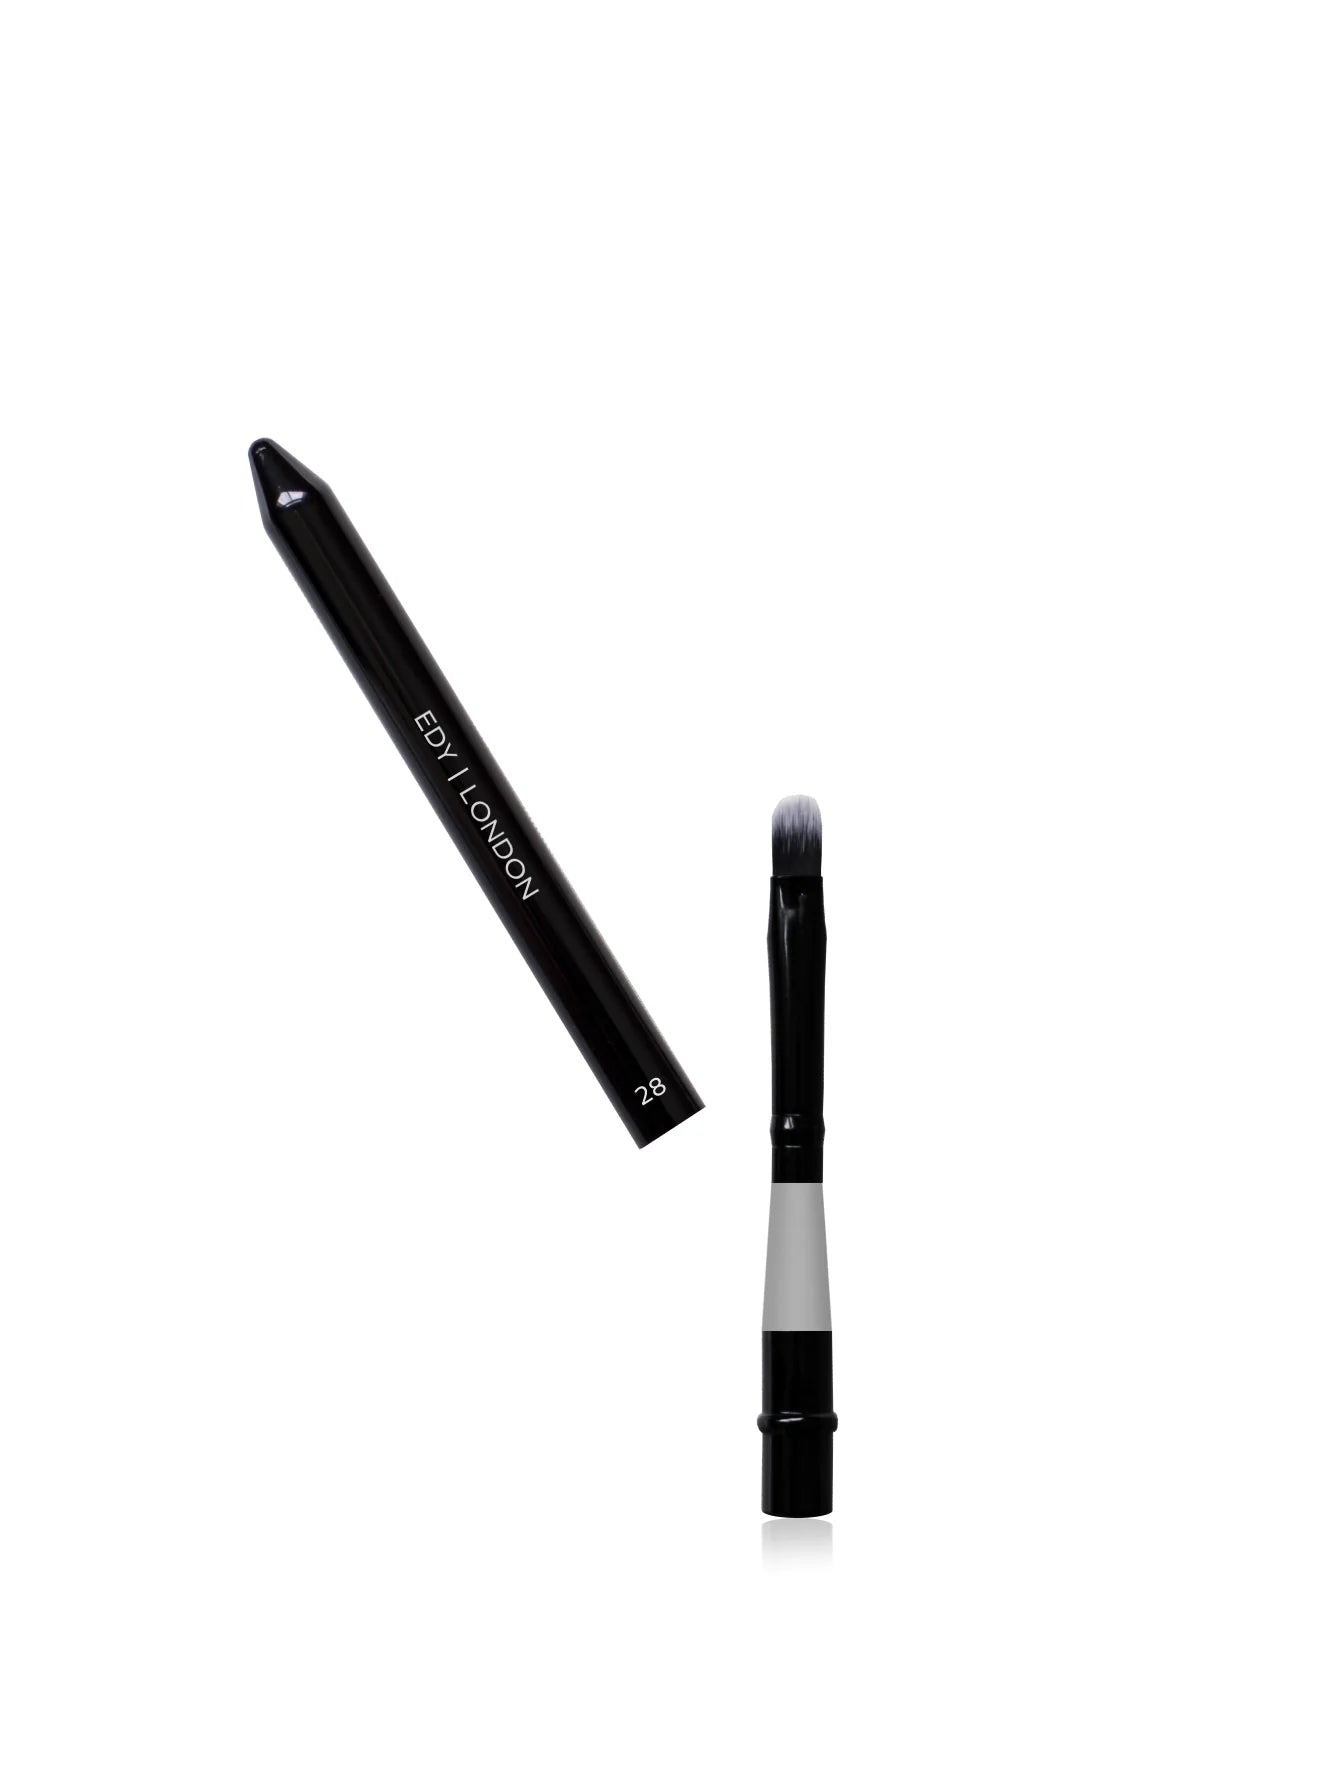 Lip Brush with Cover 28 Make-up Brush EDY LONDON Cool Grey   - EDY LONDON PRODUCTS UK - The Best Makeup Brushes - shop.edy.london